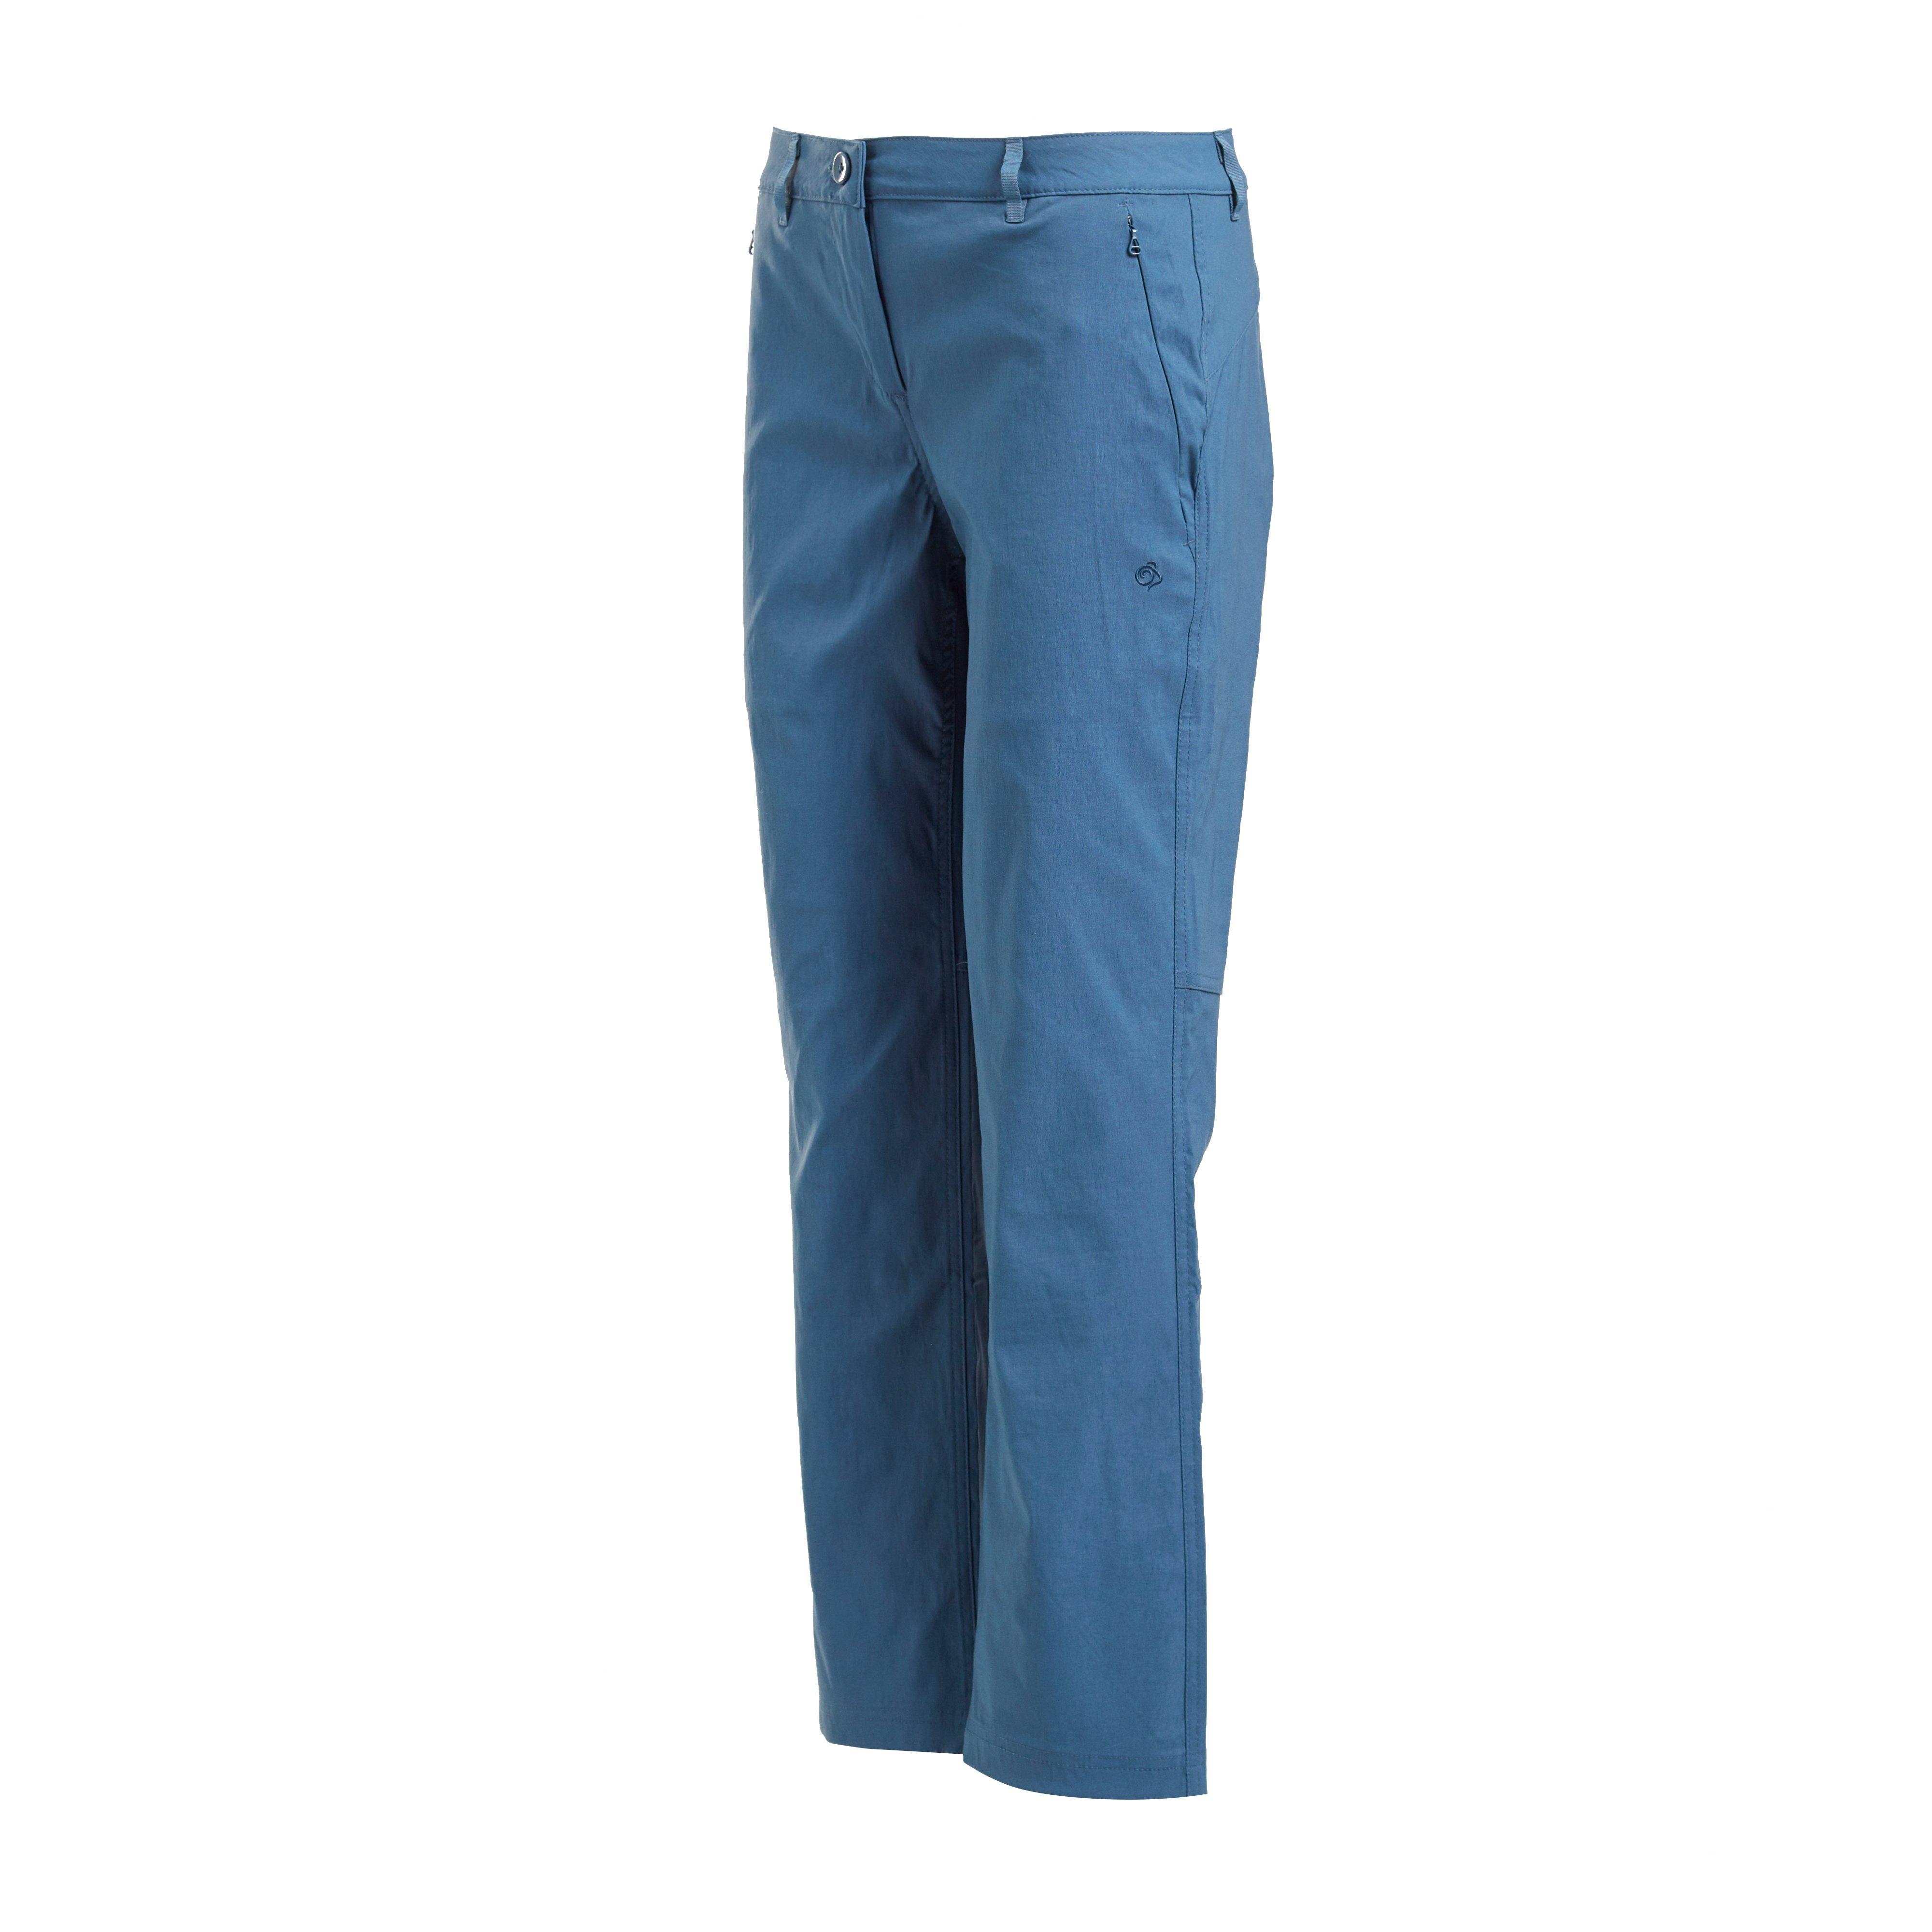 Craghoppers Women’s Lined Kiwi Trousers Review